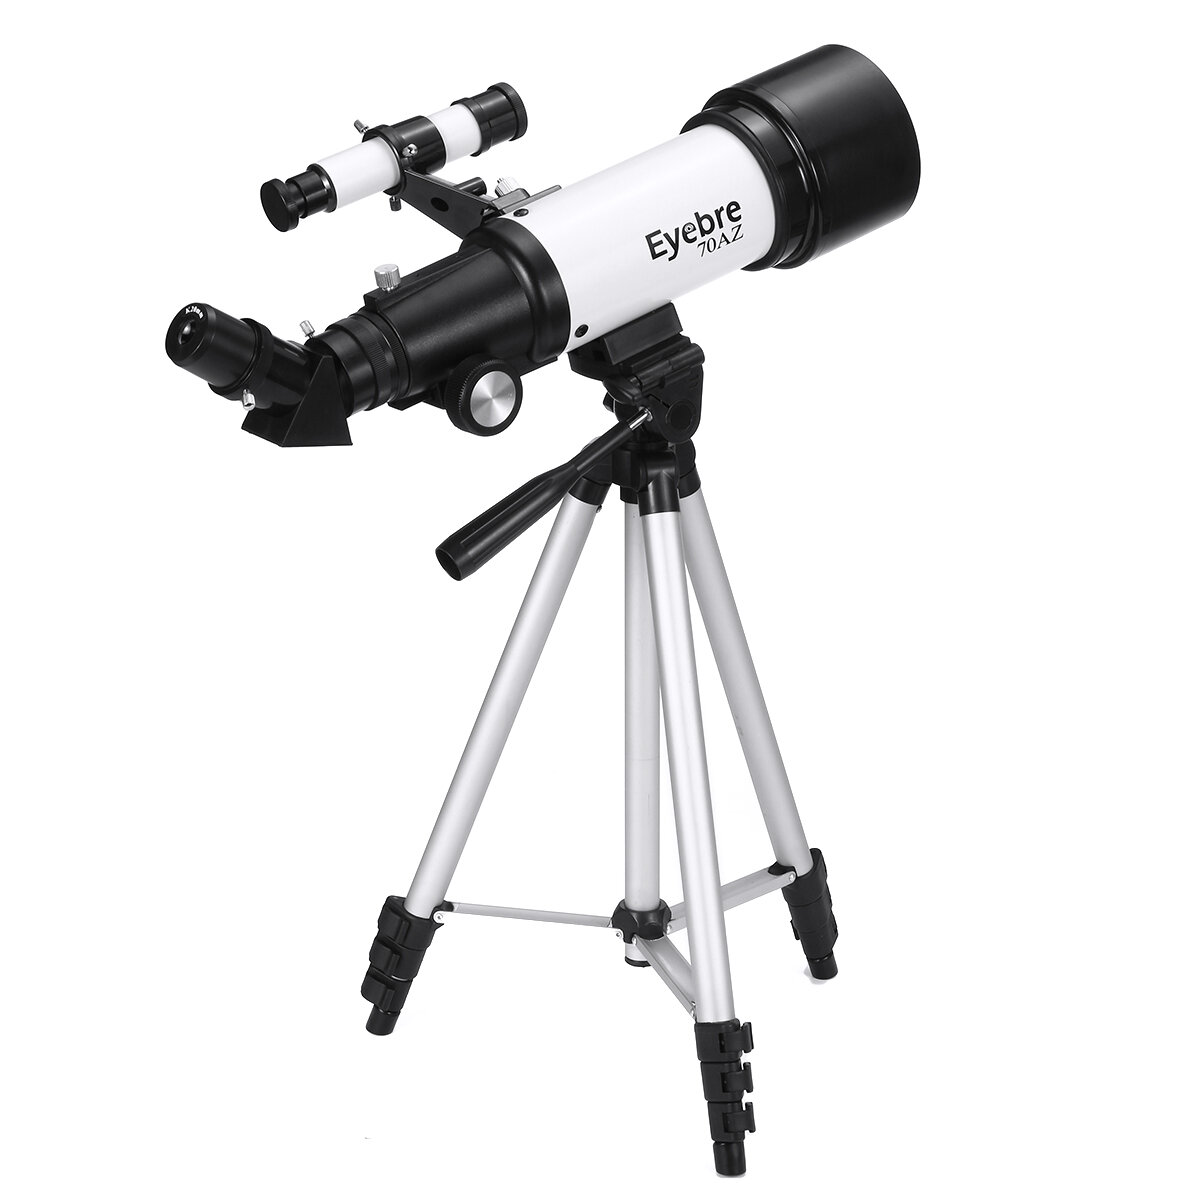  Portable 336X Travel Telescope Observing PlanetsTelescope 300mm Astronomical Refractor With Tripod & Finder Scope